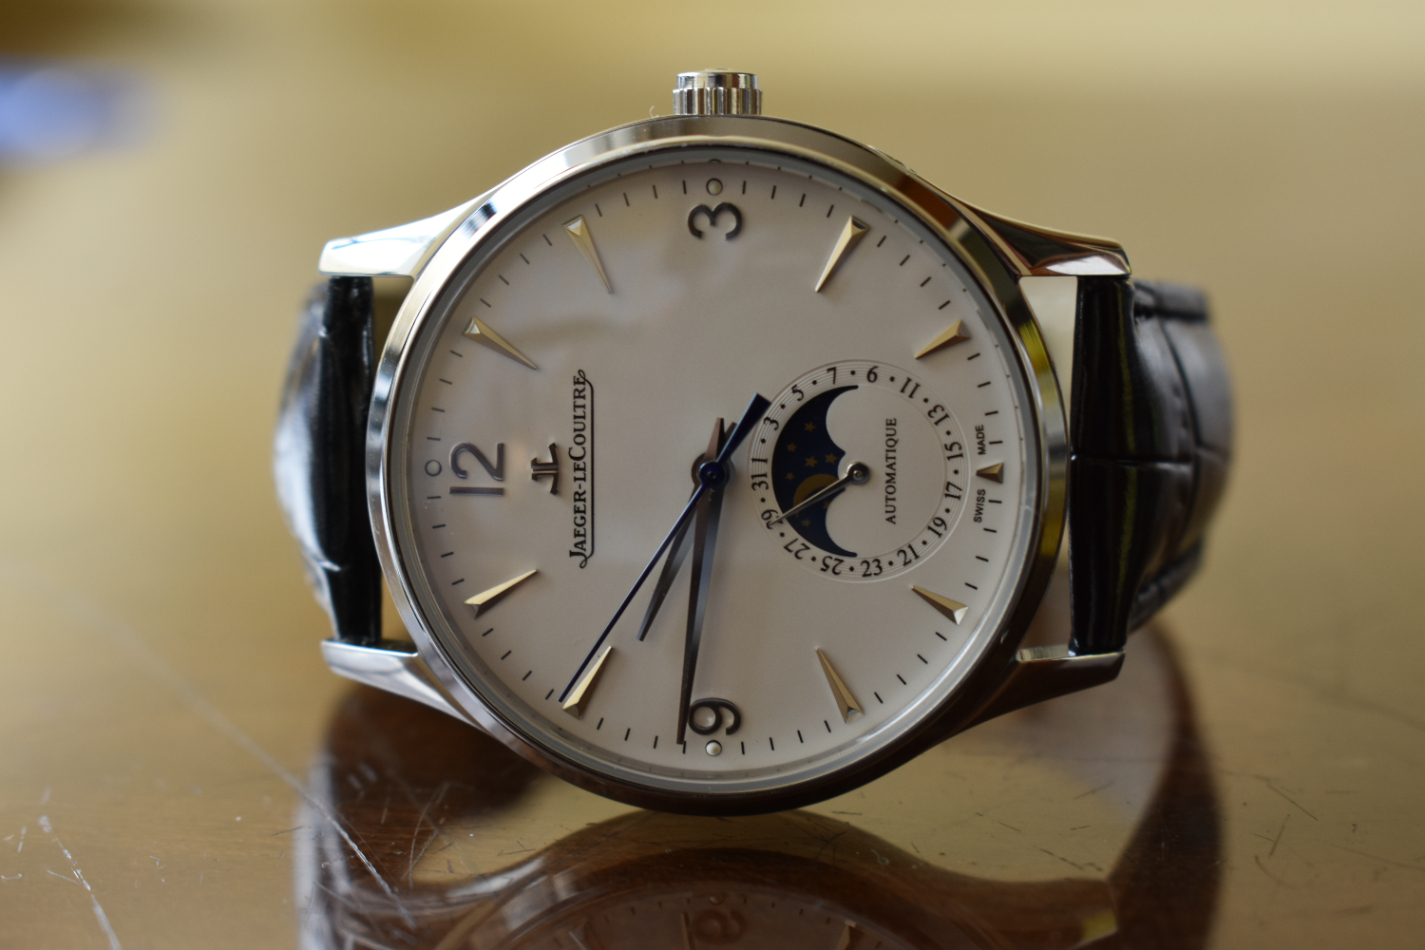 JAEGER LECOULTRE MASTER ULTRA THIN MOON PHASE SELF WINDING MEN'S WATCH